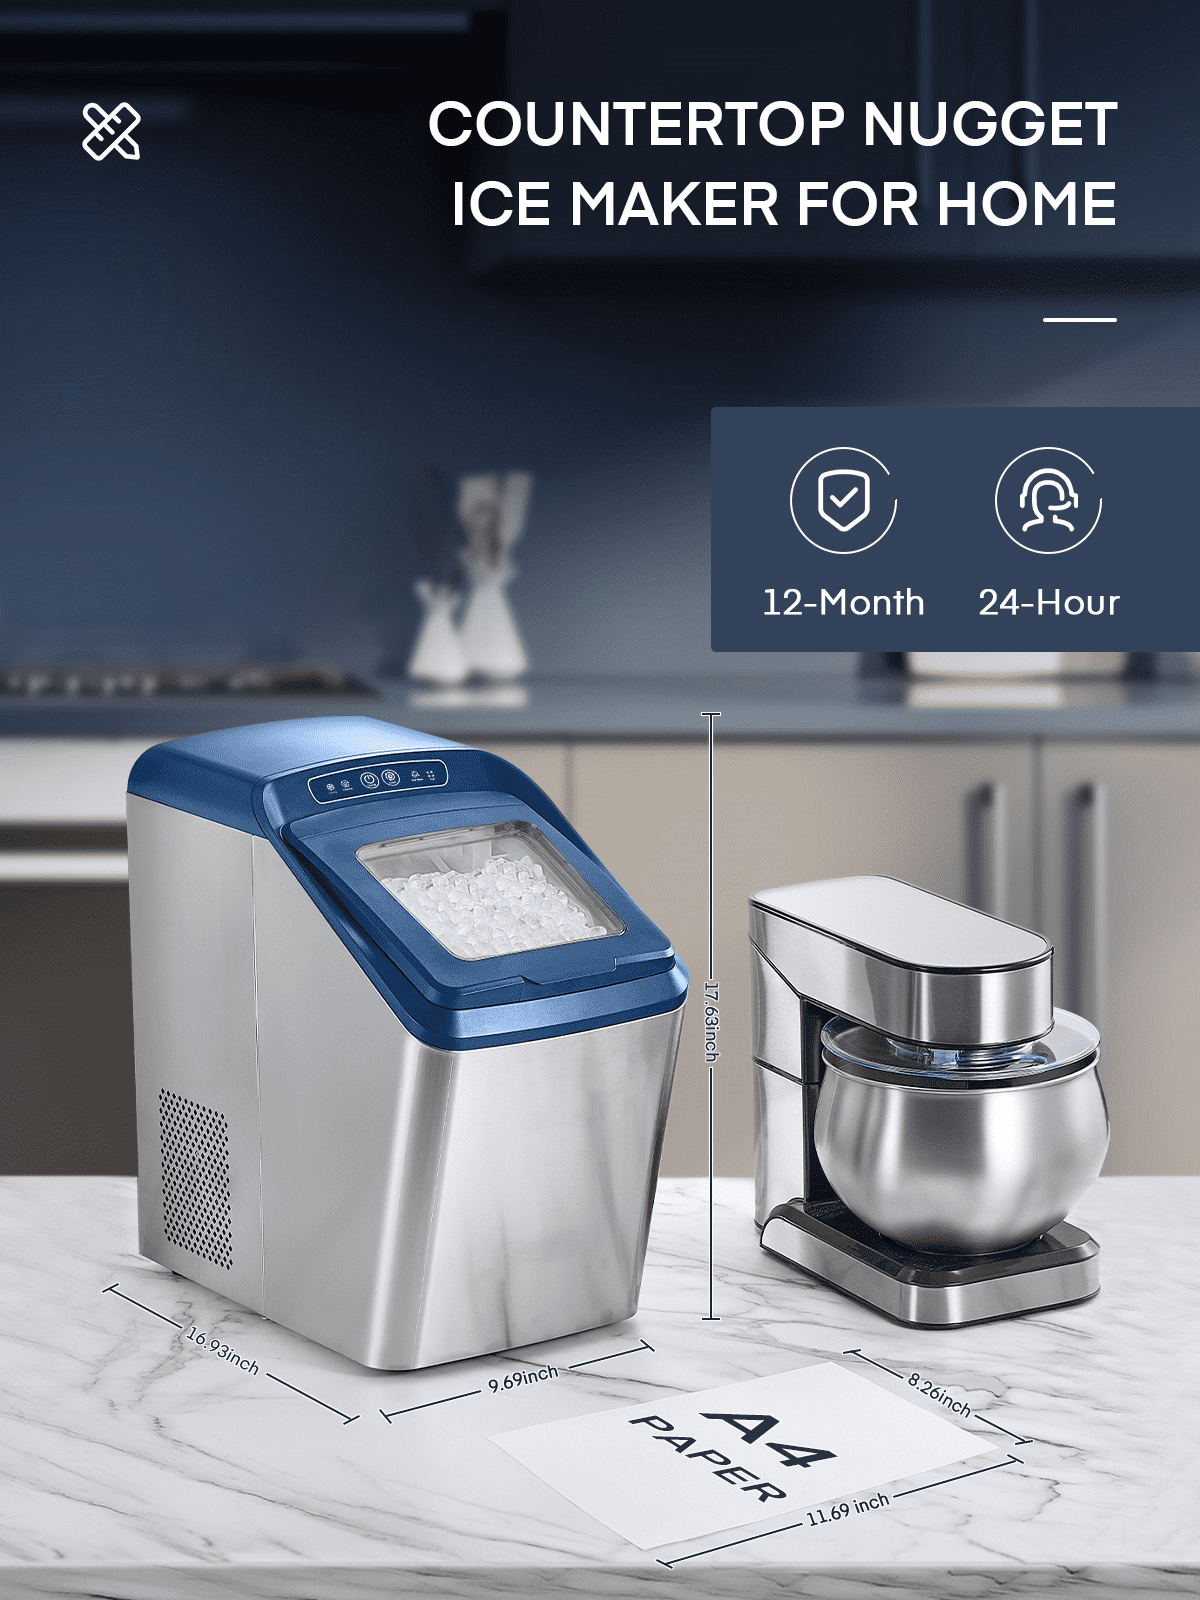  YISUFO Nugget, Pebble Ice Makers Countertop, 30lbs/Day,  Self-Cleaning, 2 Ways Water Refill, Stainless Steel Sonic Ice Maker Machine  with 3Qt Water Reservoir, for Home Office Party Bar : Appliances